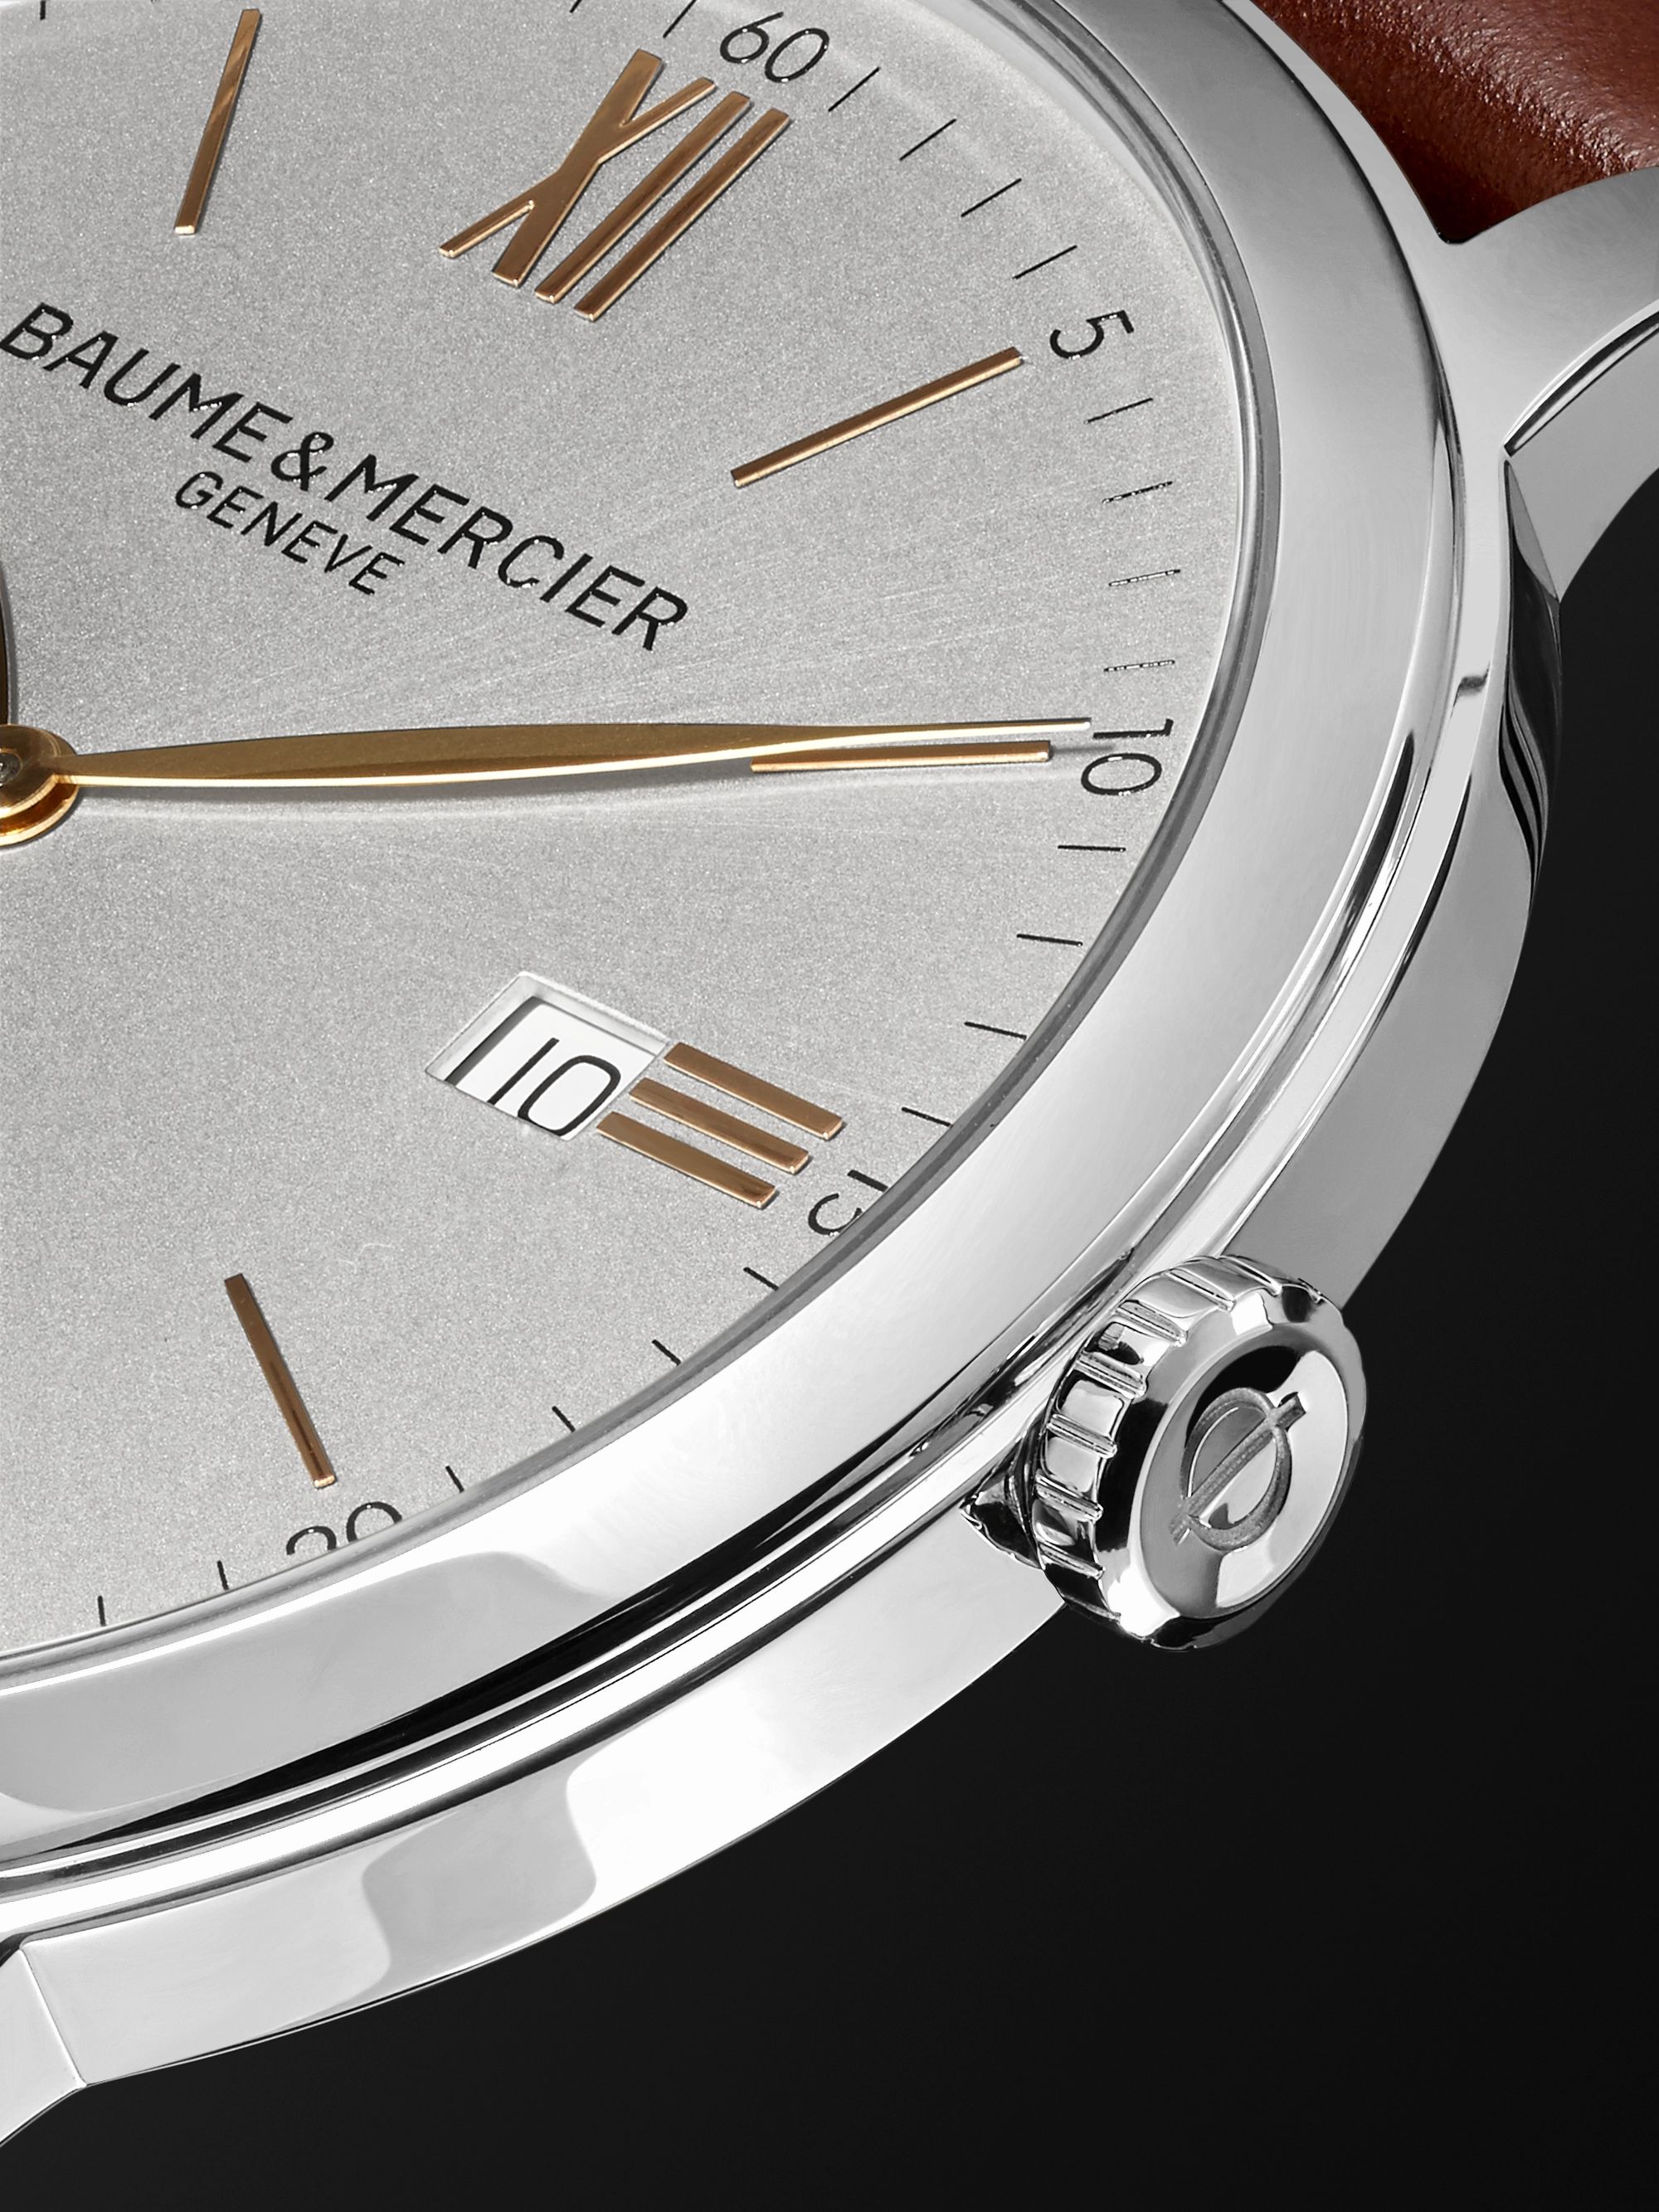 BAUME & MERCIER Classima 42mm Stainless Steel and Croc-Effect Leather Watch, Ref. No. 10415